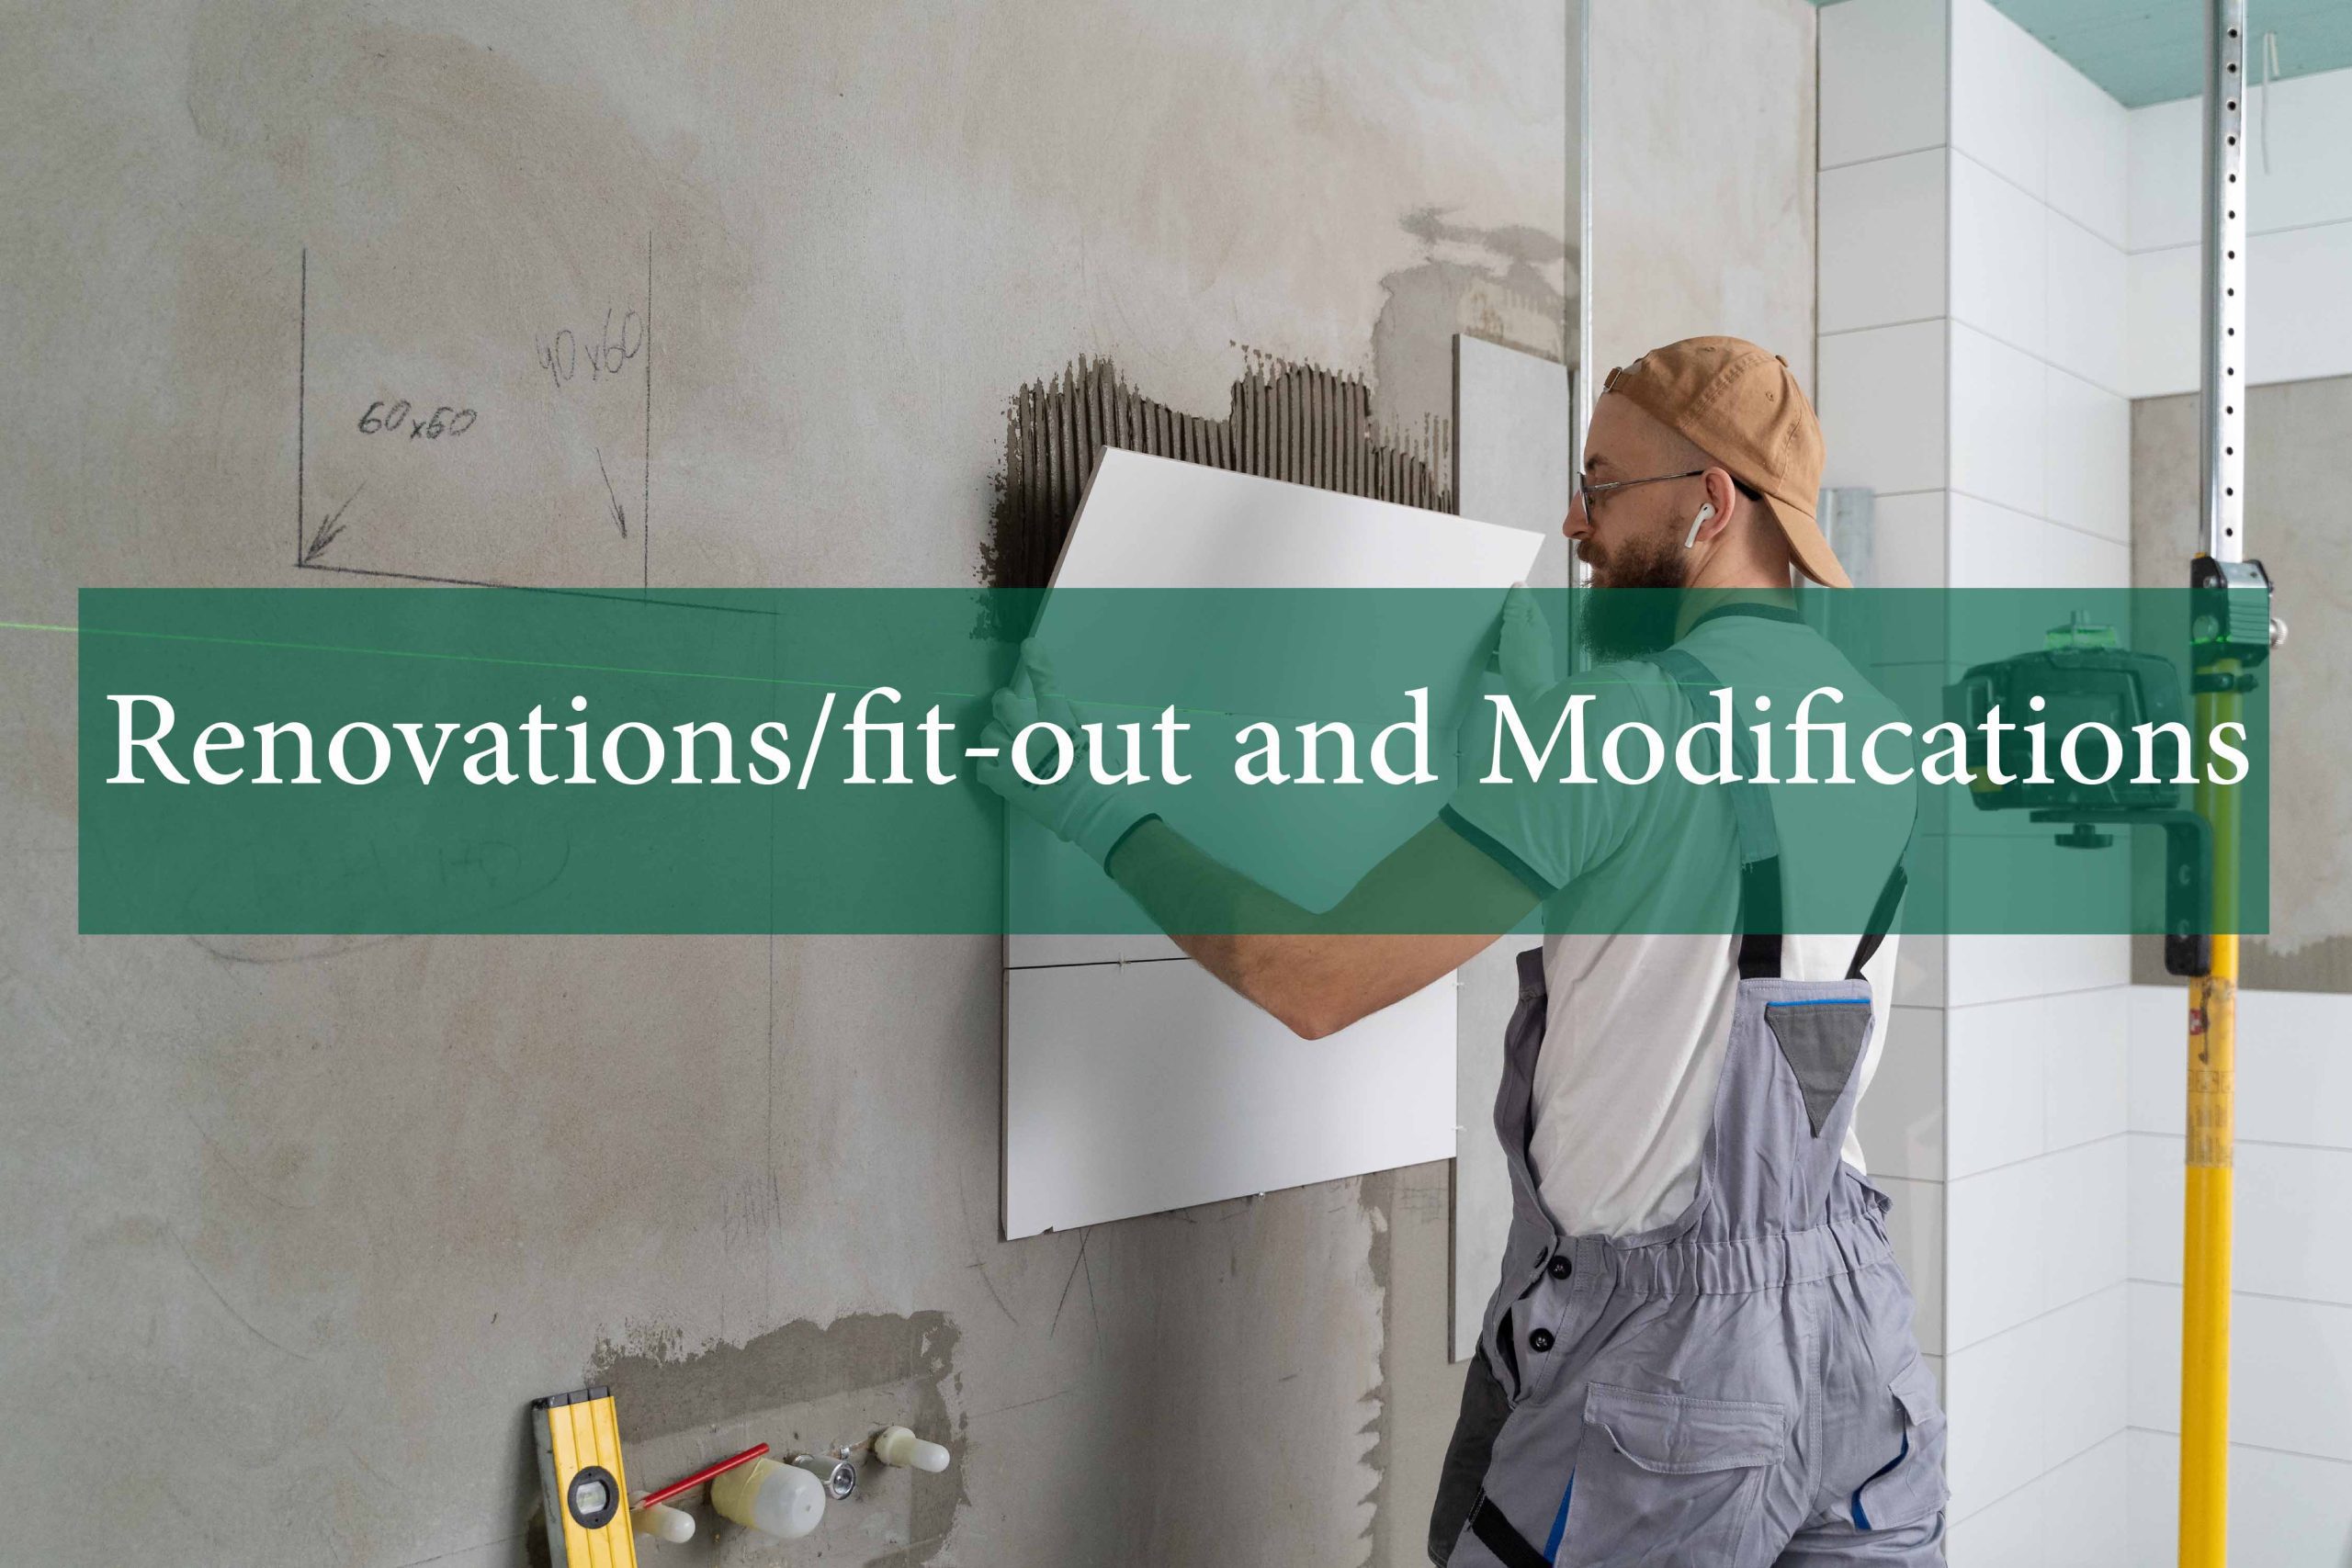 Renovations/fit-out and Modifications